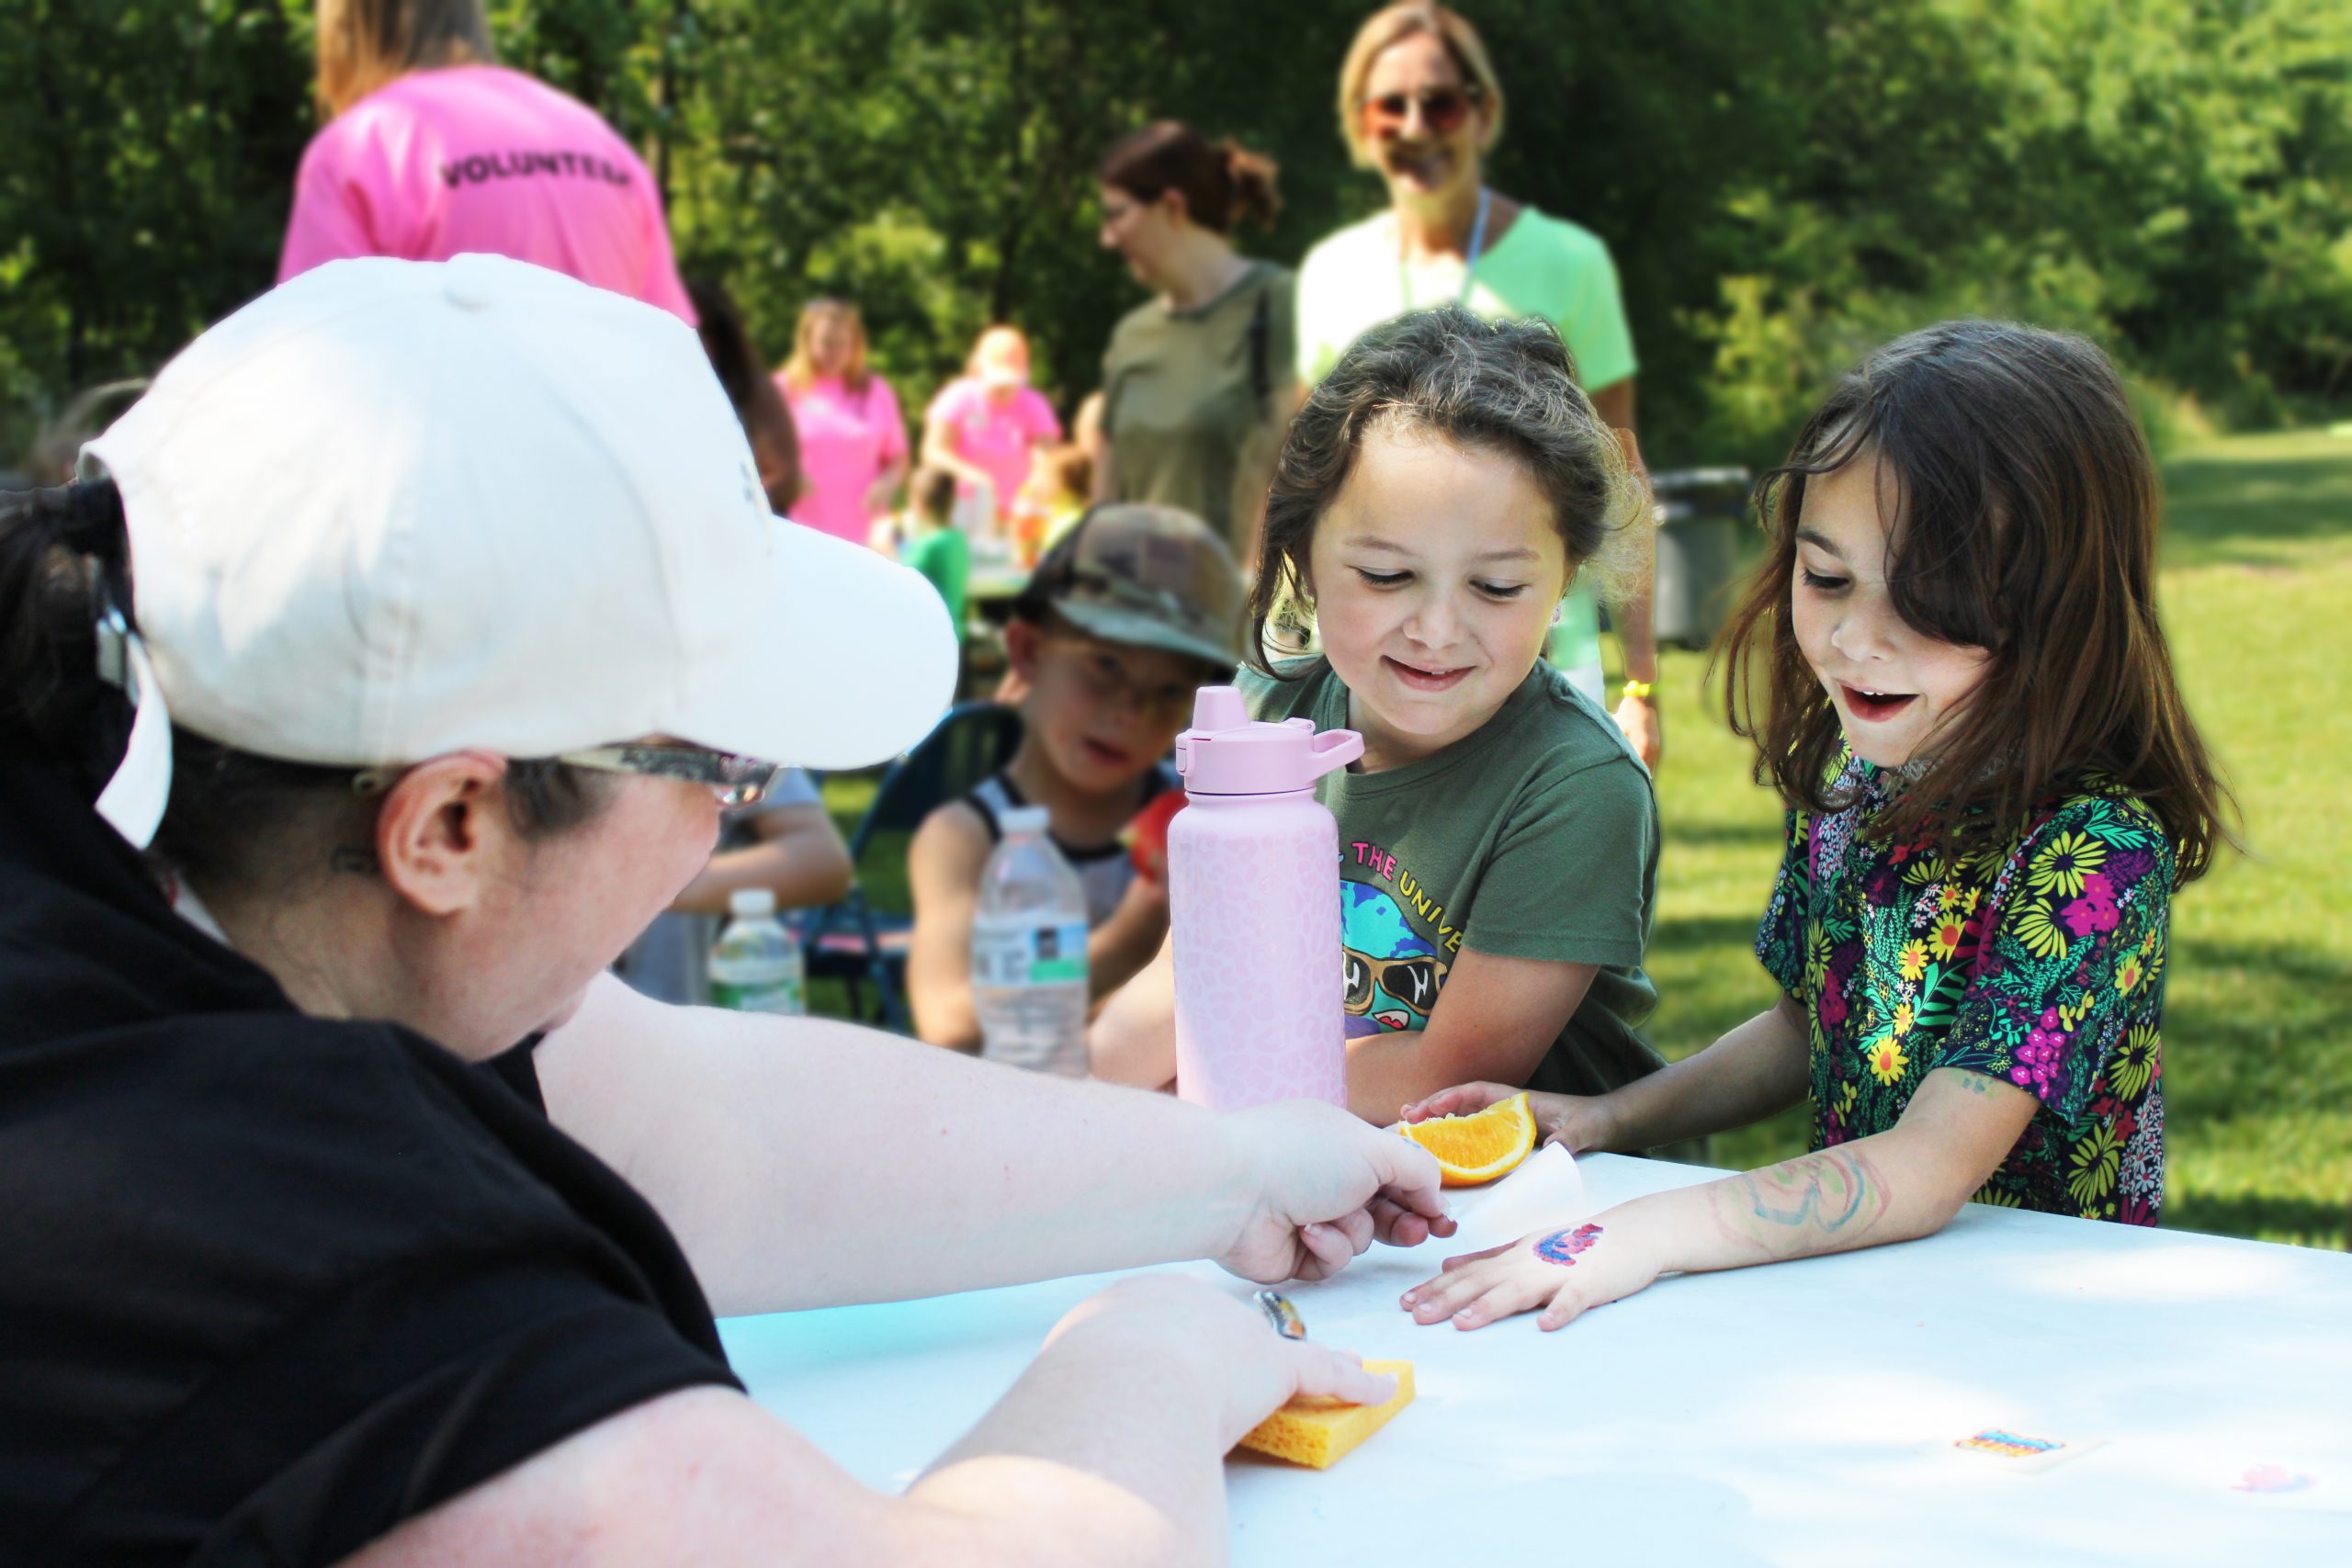 student gets a temporary tattoo at field day